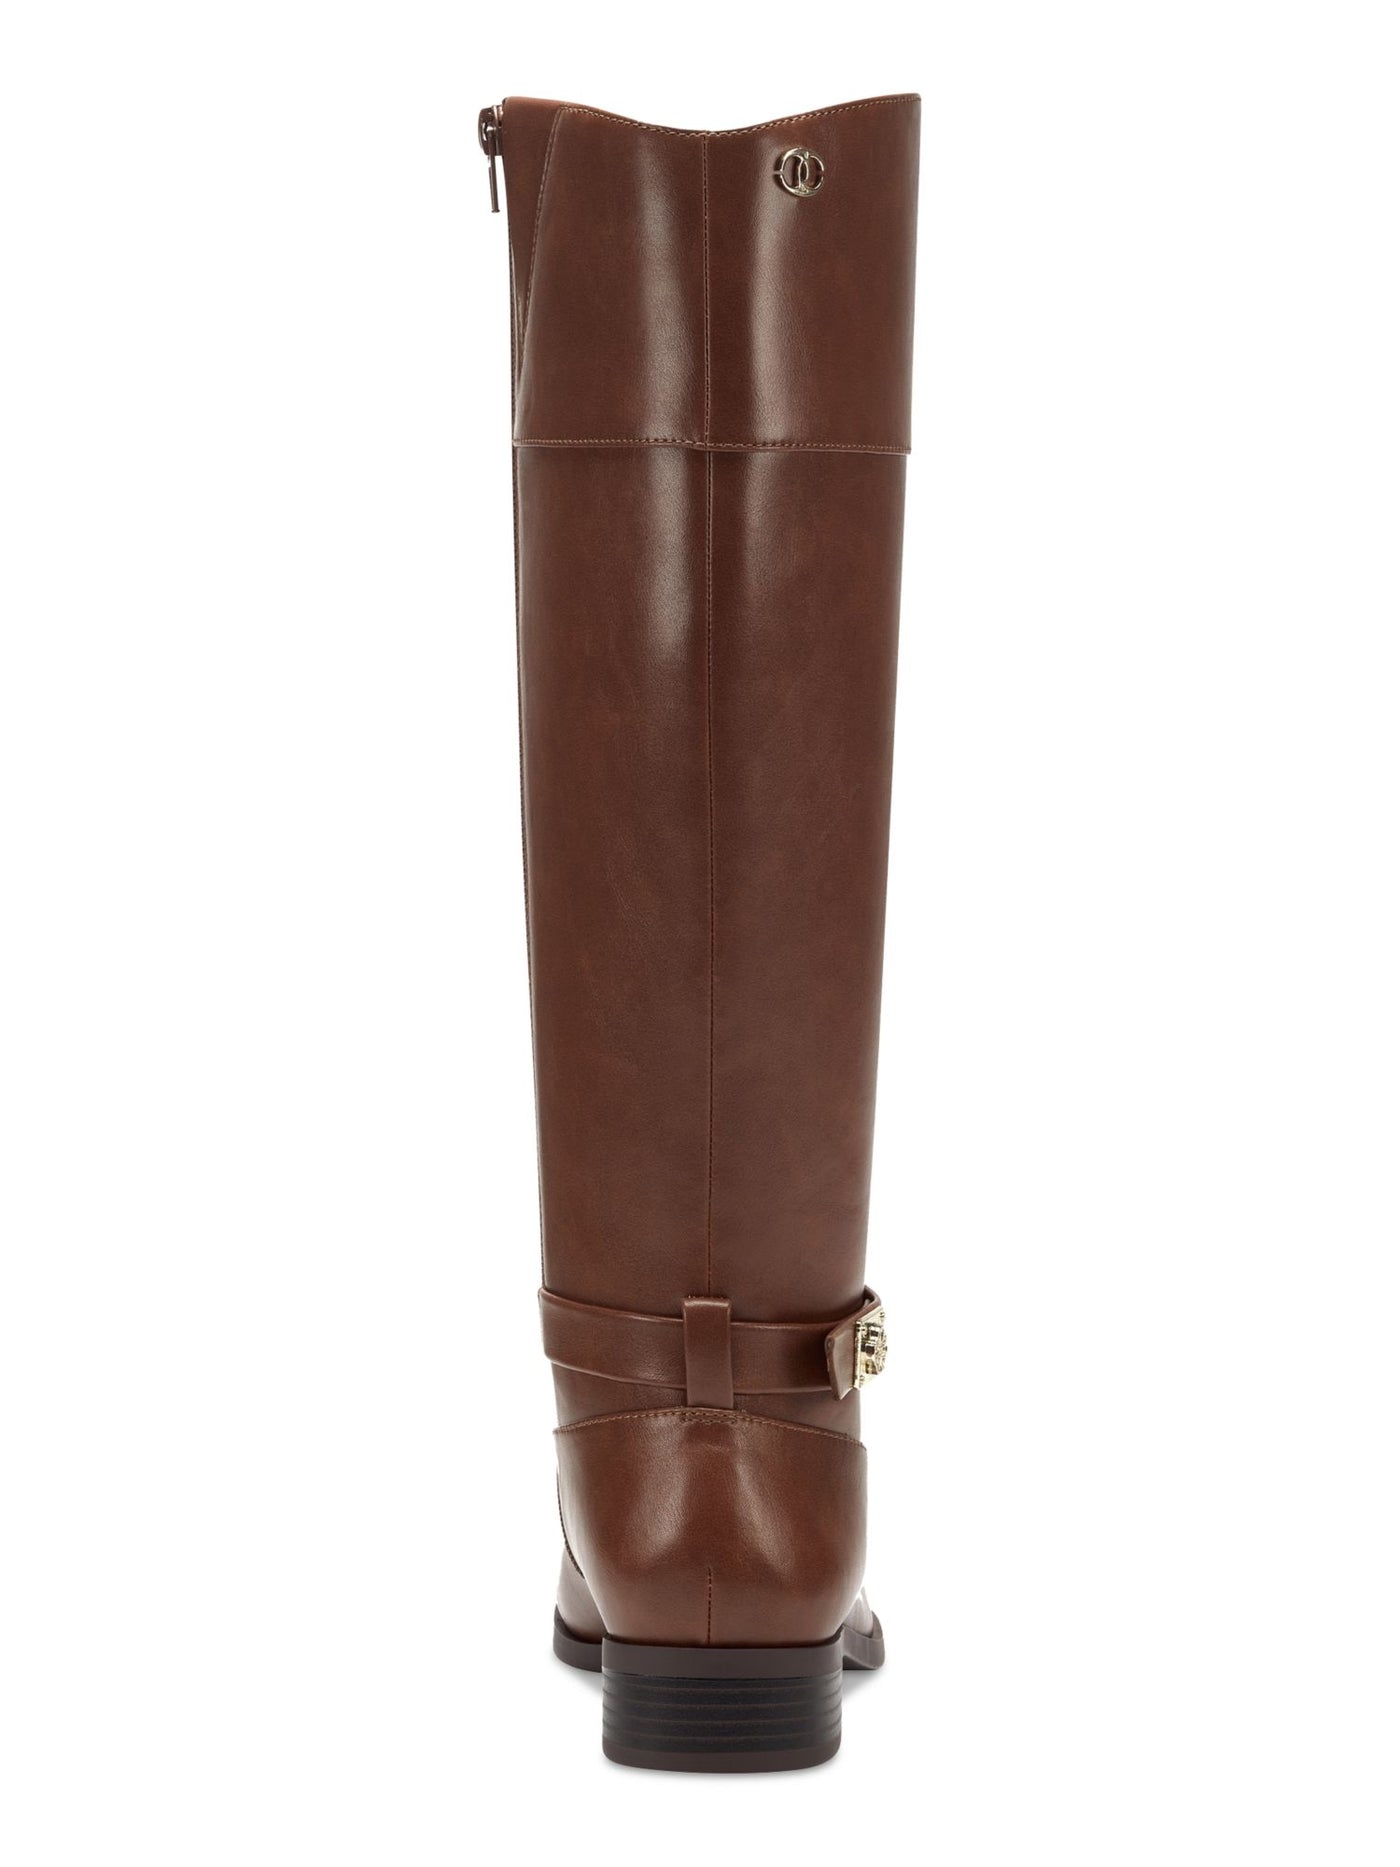 CHARTER CLUB Womens Brown Buckle Accent Johannes Round Toe Zip-Up Riding Boot 6 M